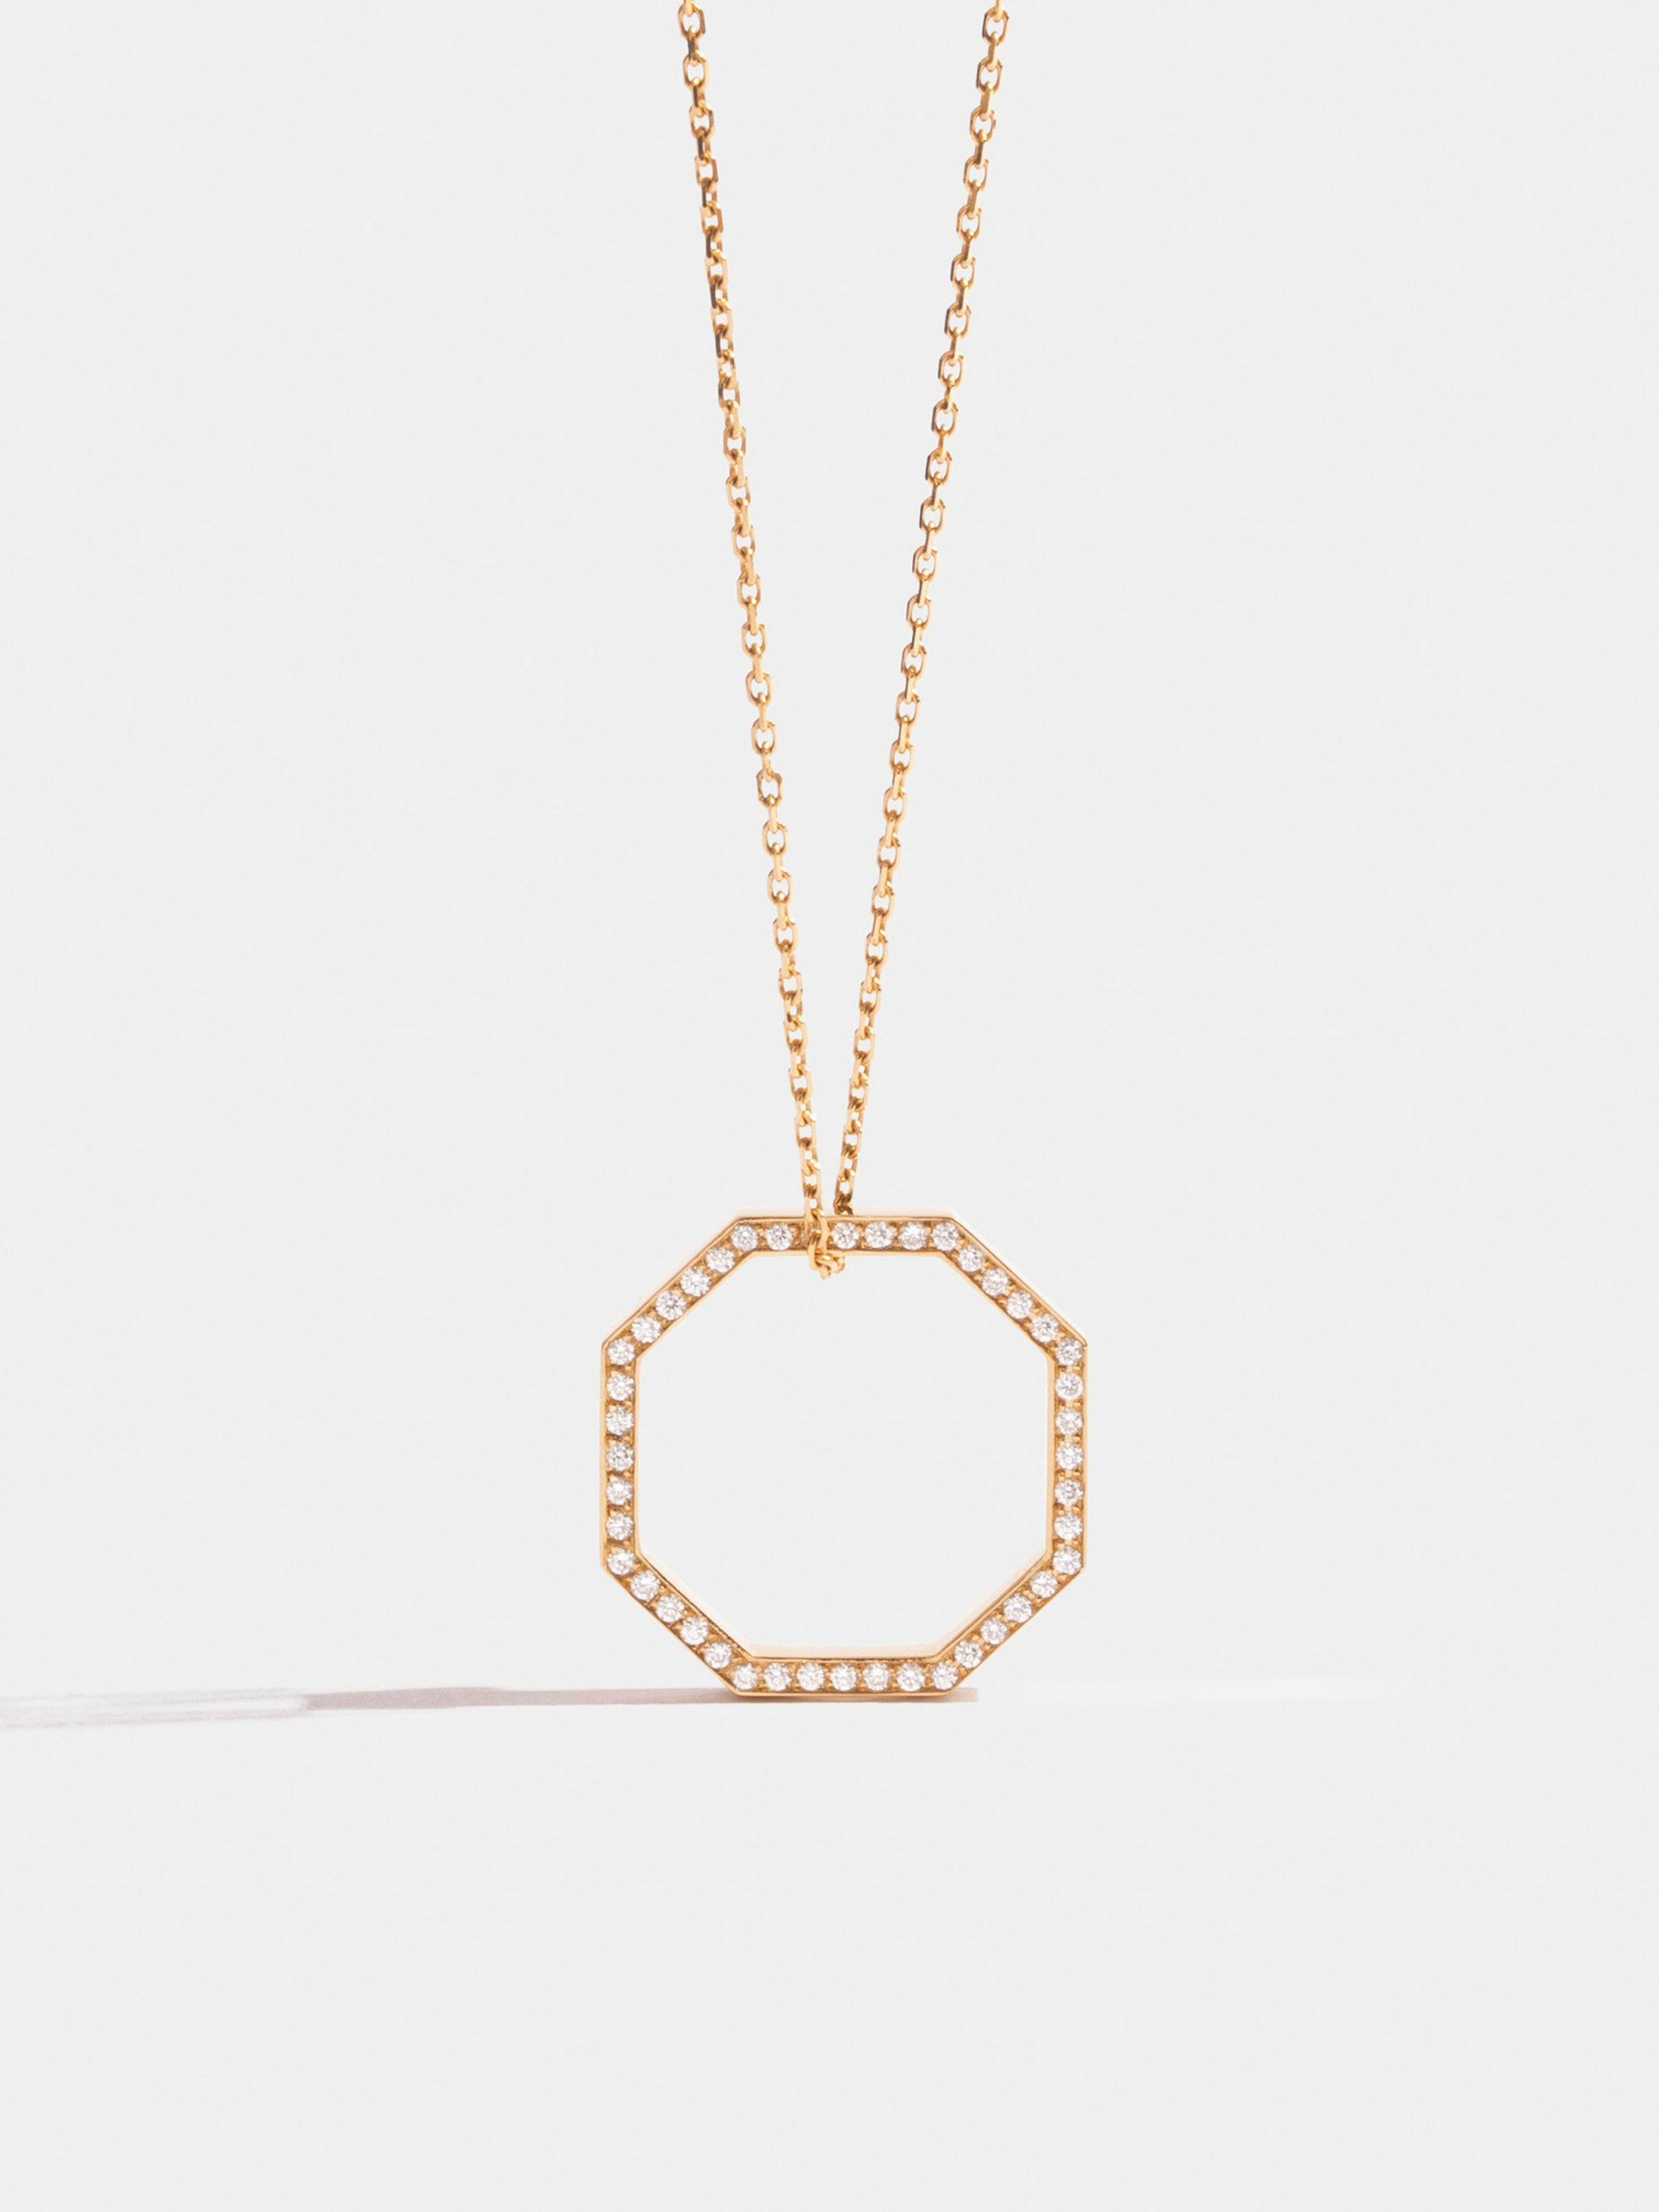 Octogone necklace with a 18mm pendant in 18k Fairmined ethical yellow gold, paved with lab-grown diamonds, on a 88cm chain.